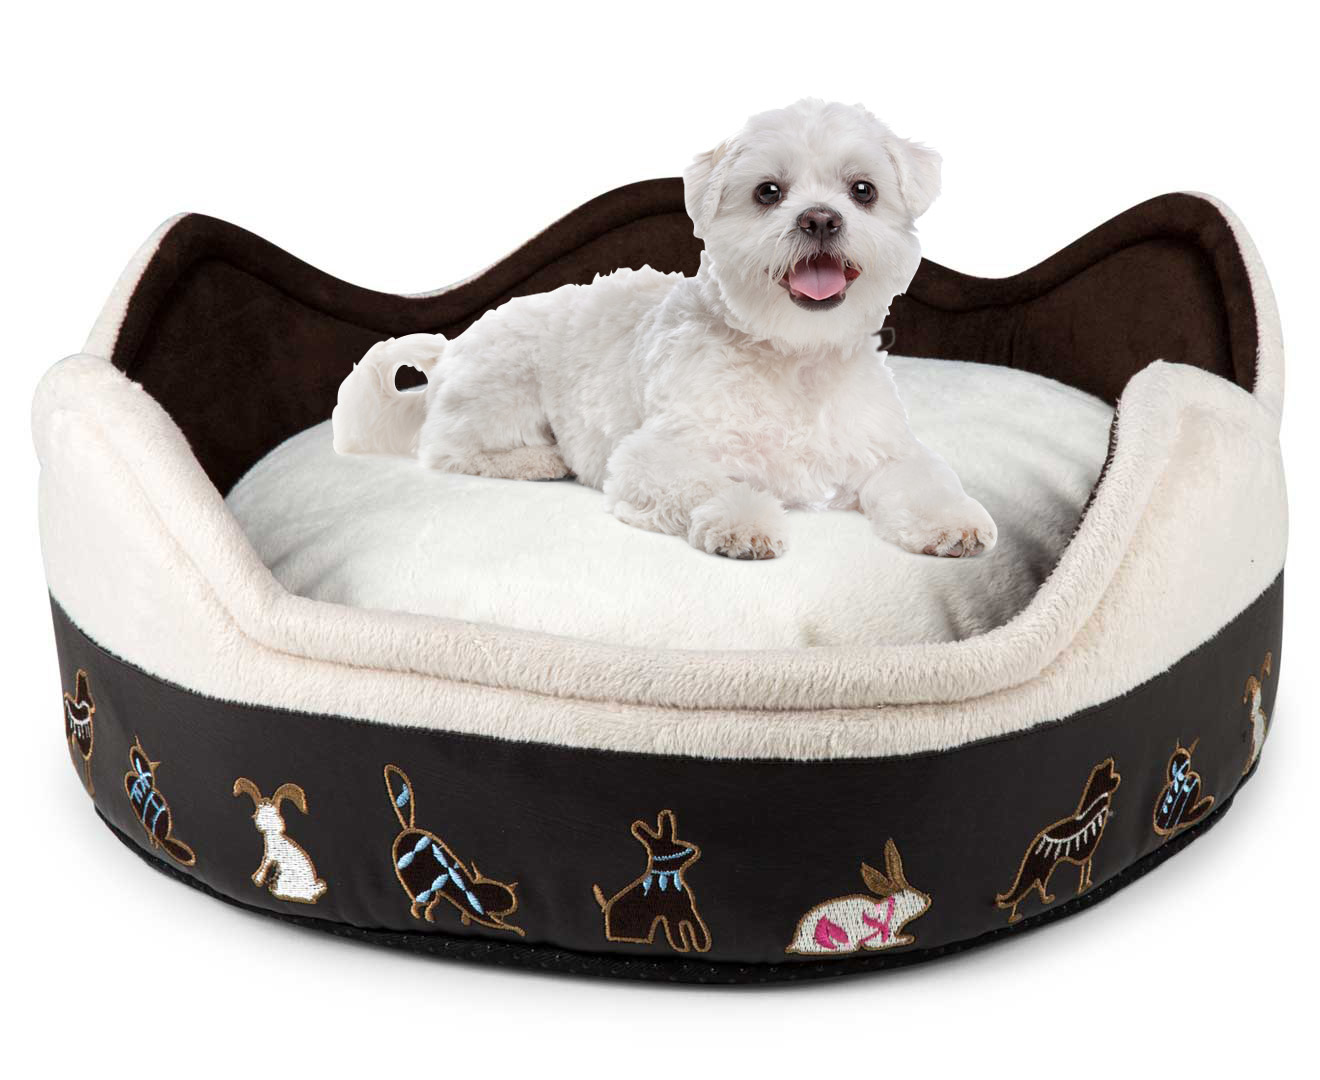 Microplush 40x17cm Round Pet Bed for Small Dogs - Cream/Brown